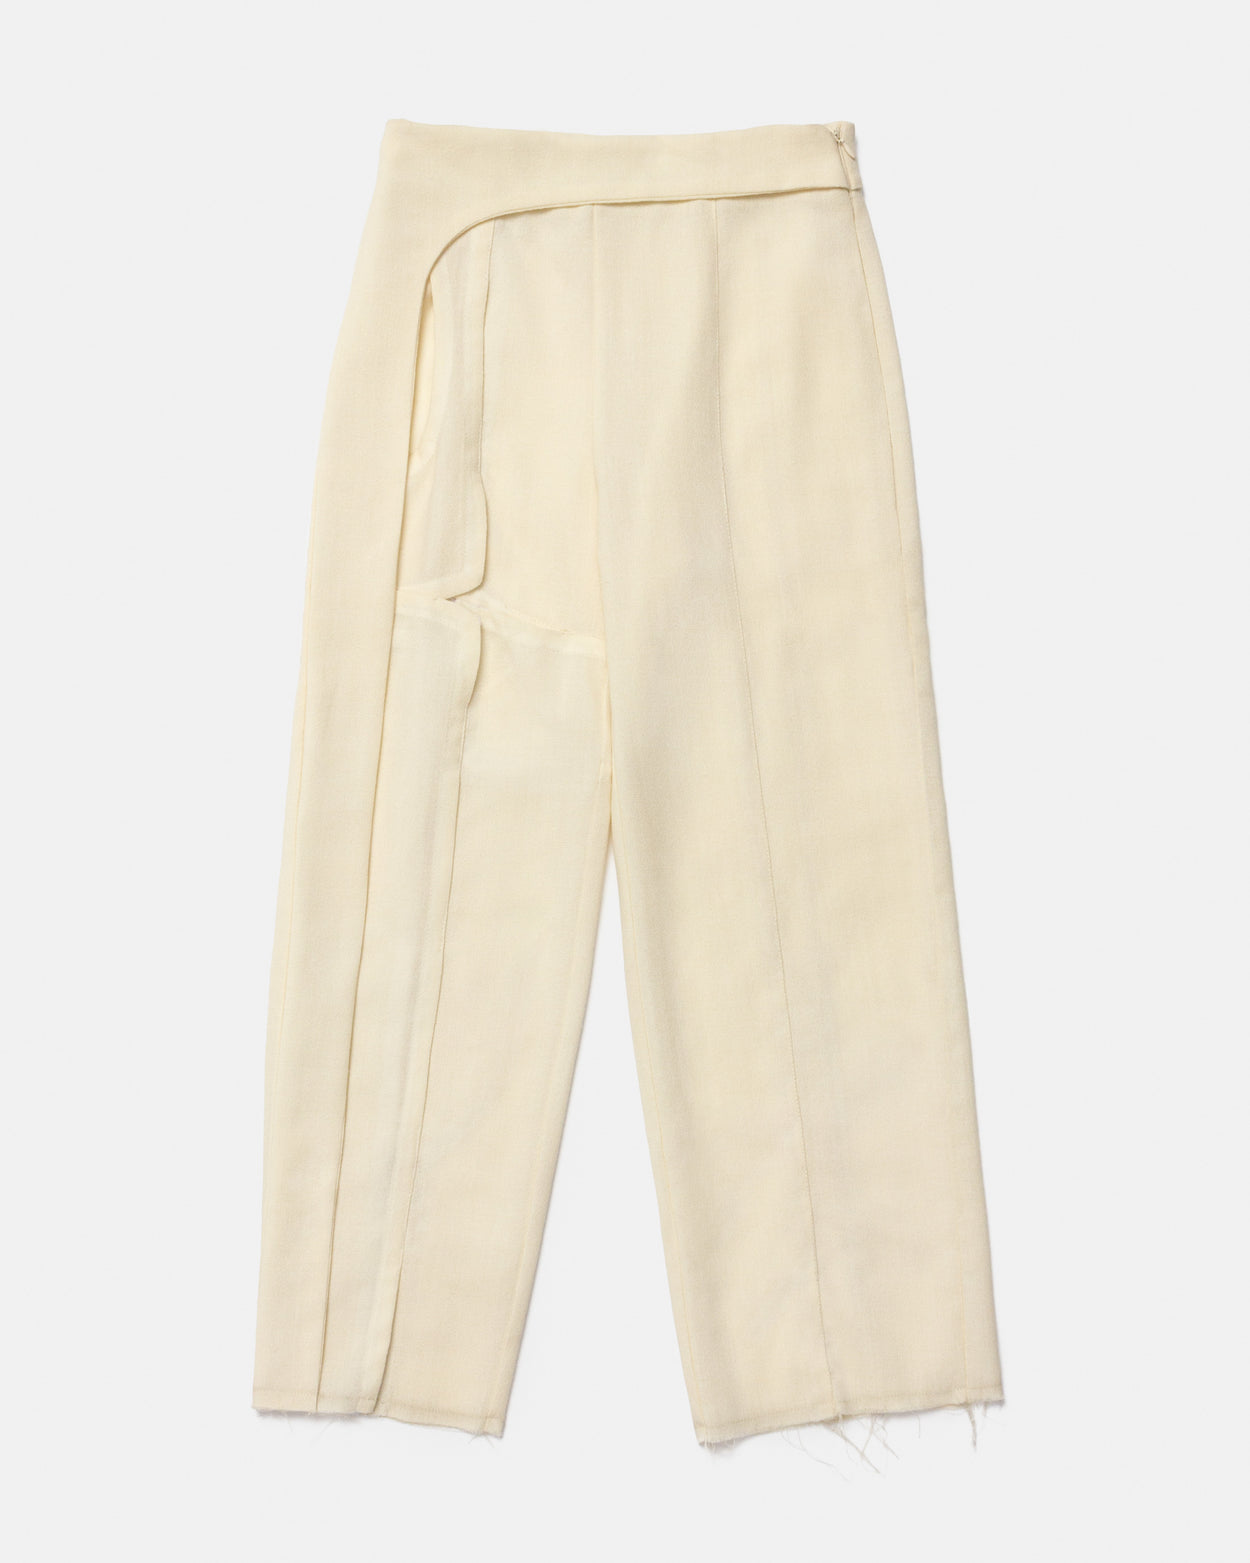 The Cloud Trousers